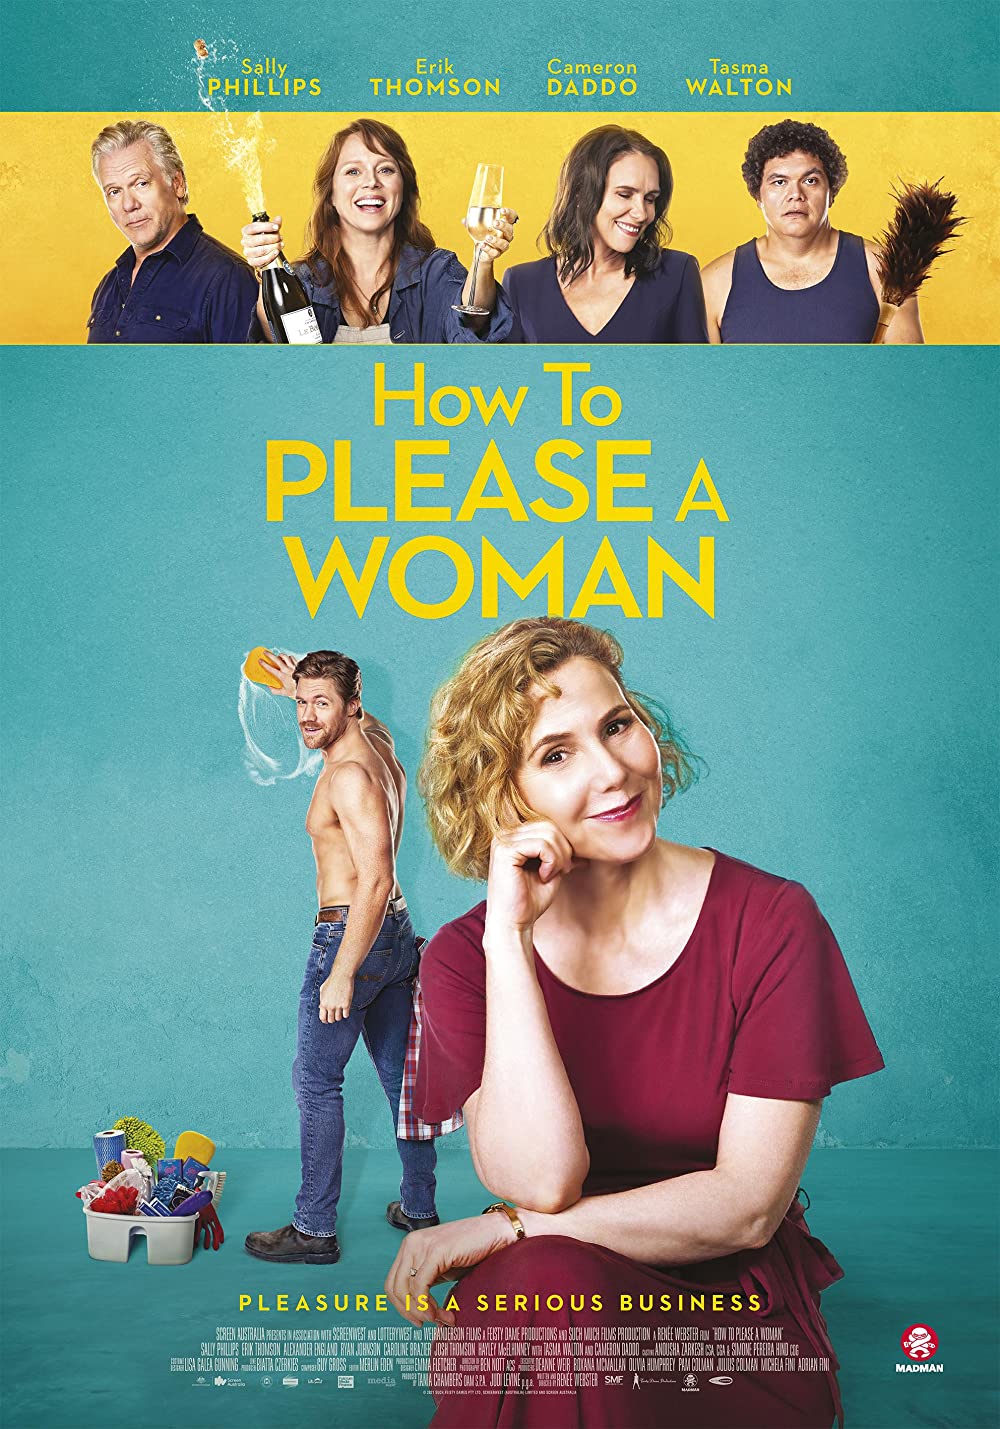 How to Please a Woman Movie 2022, Official Trailer, Release Date